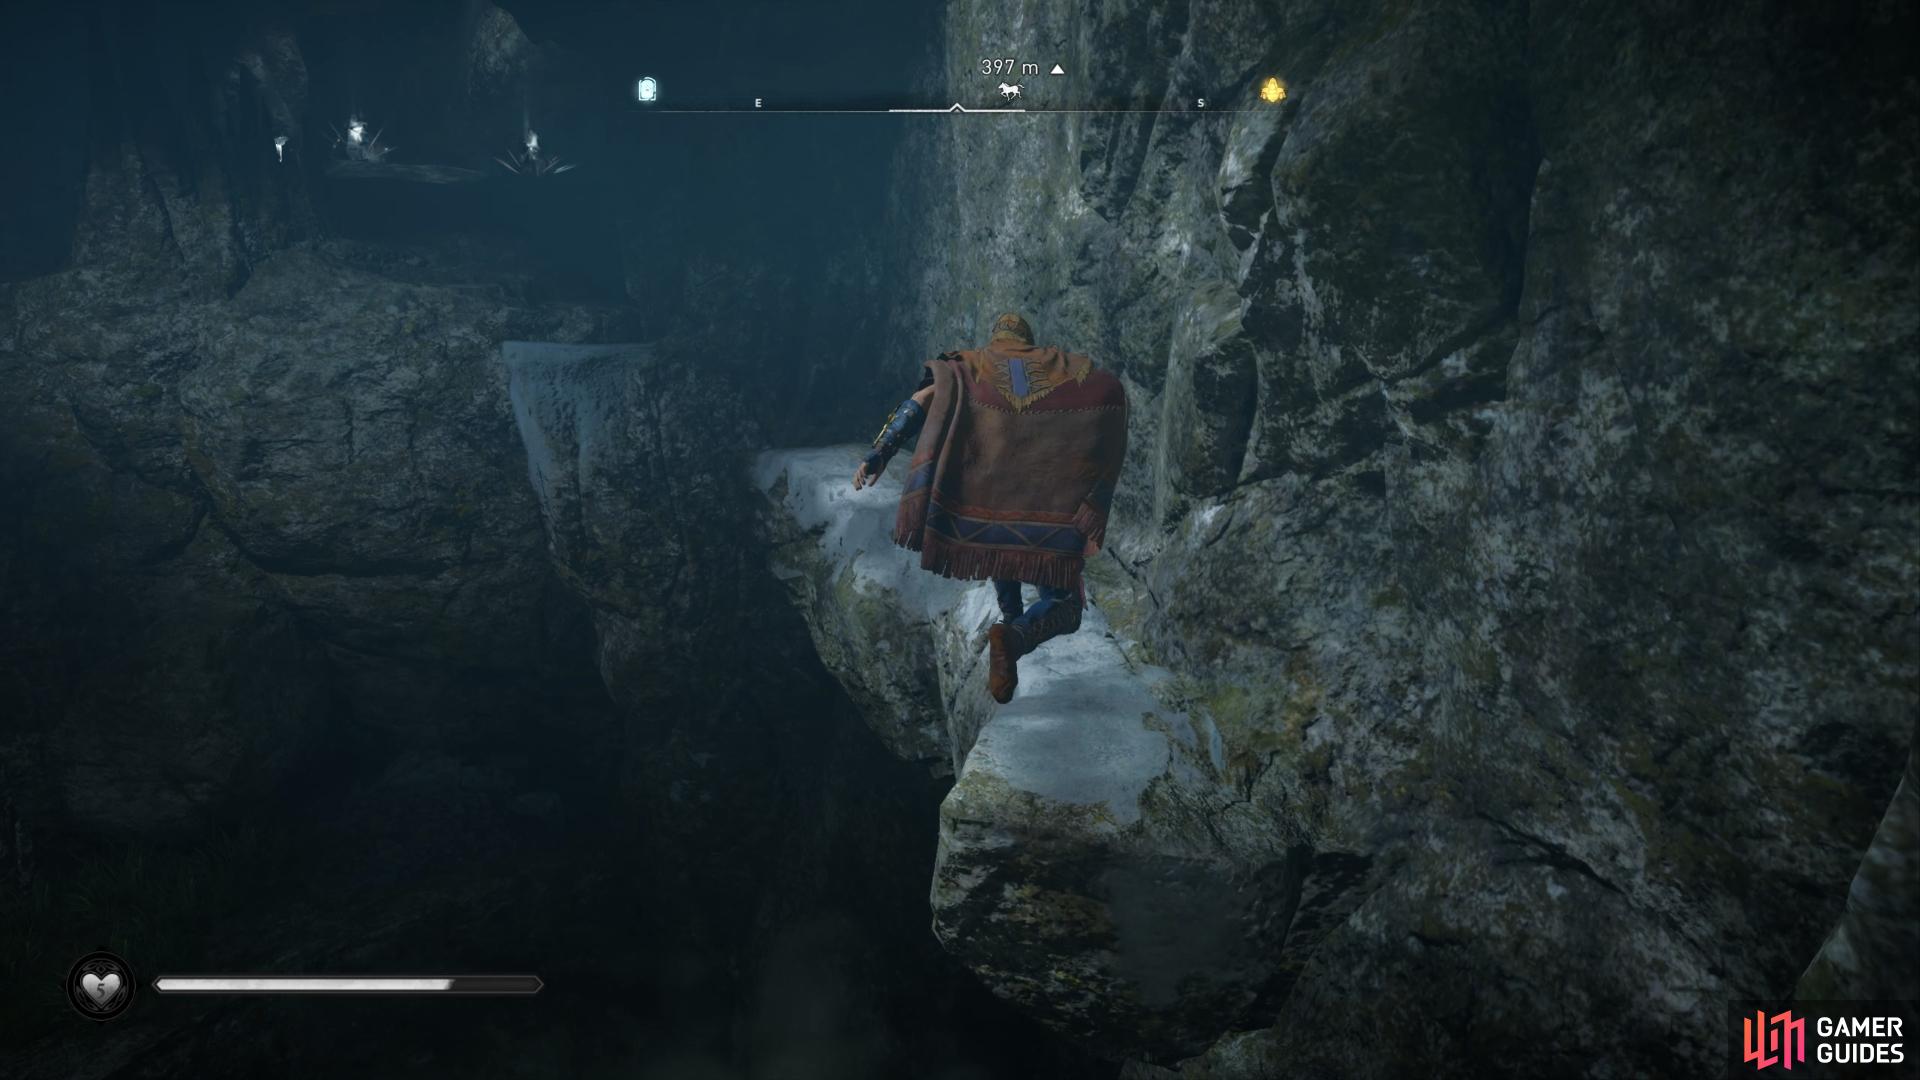 Once inside the cave system, follow the ledges through the chambers.